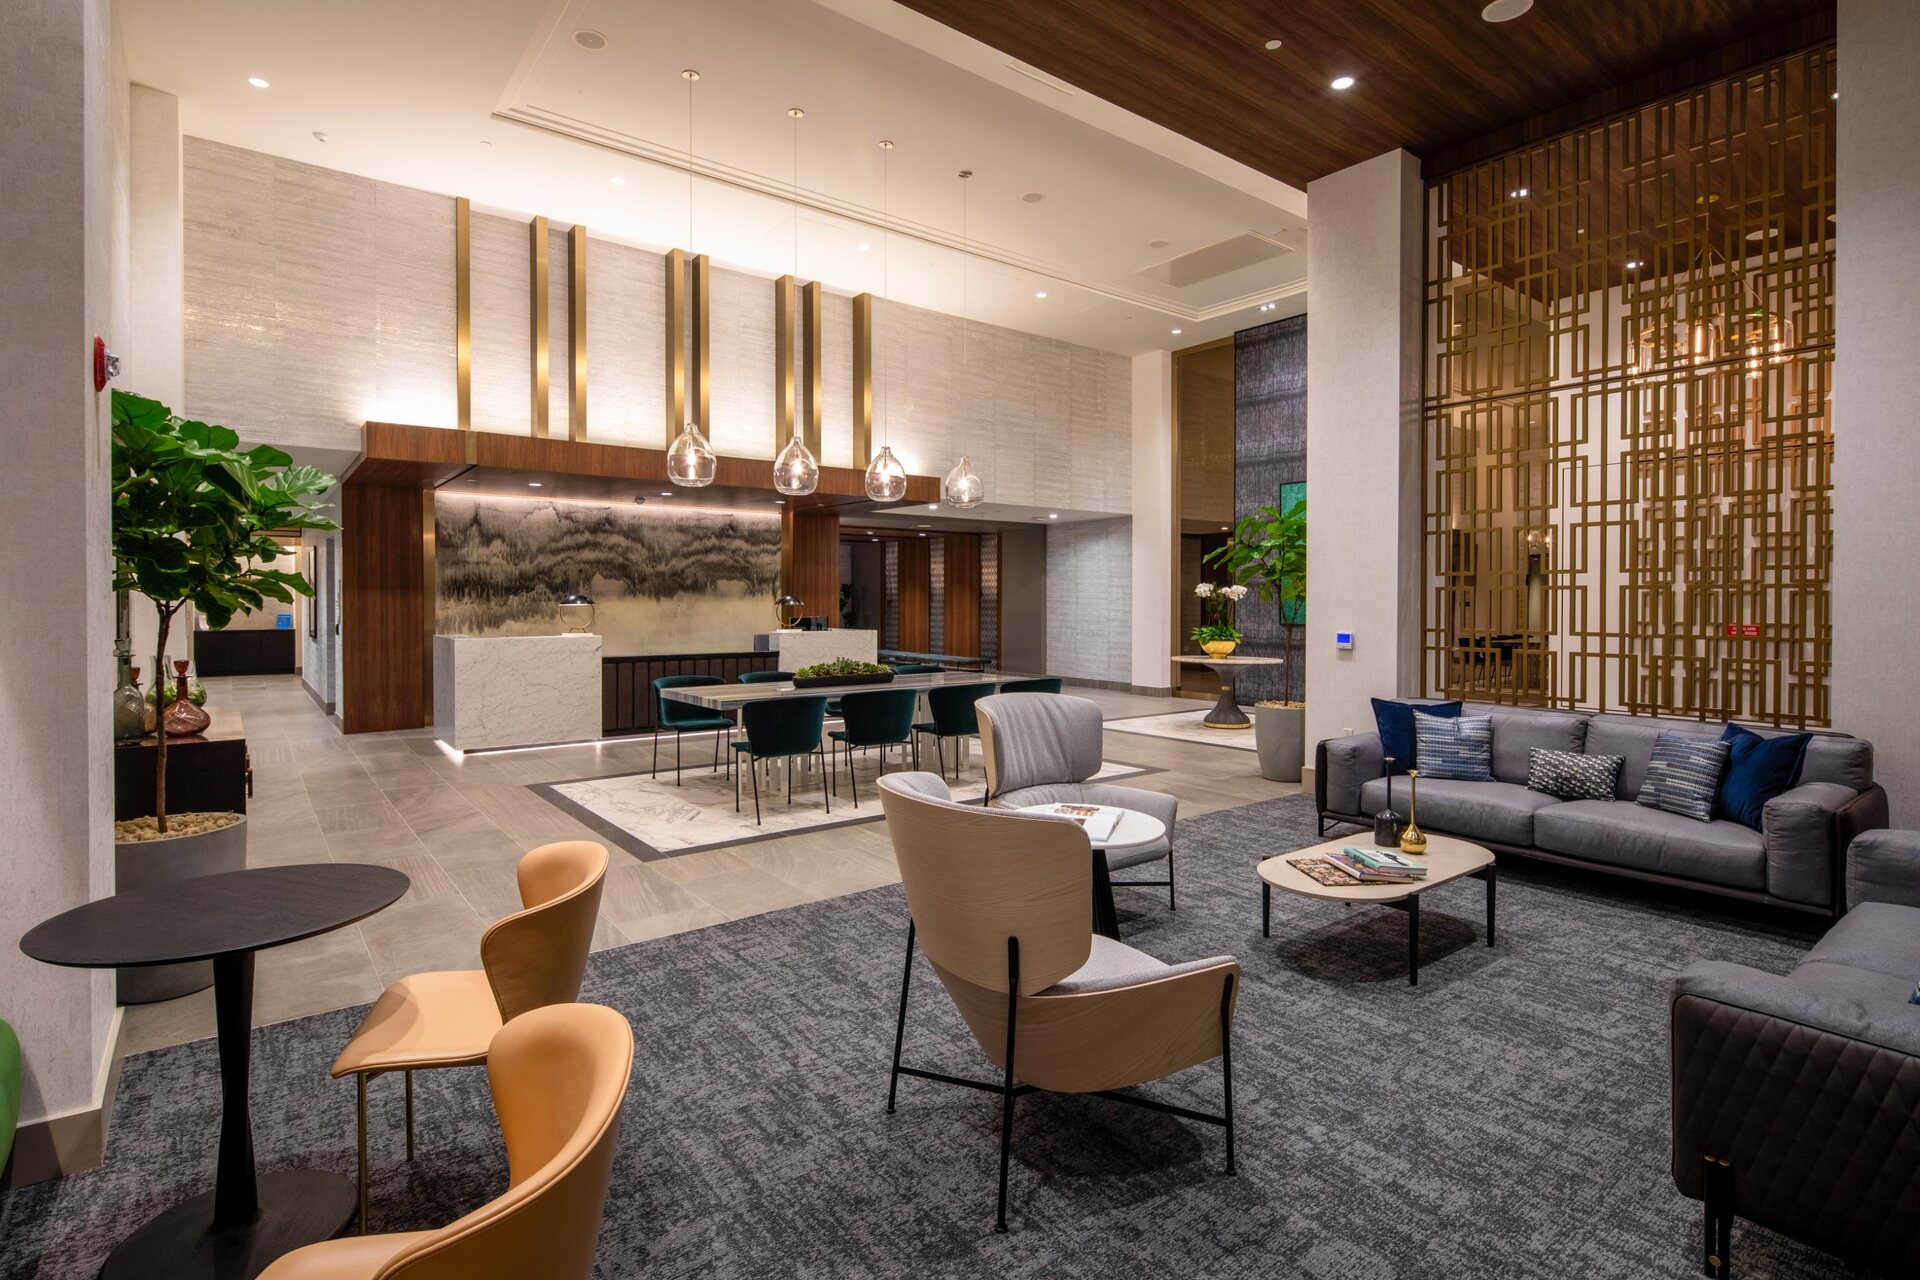 Lobby with on-site resident concierge services